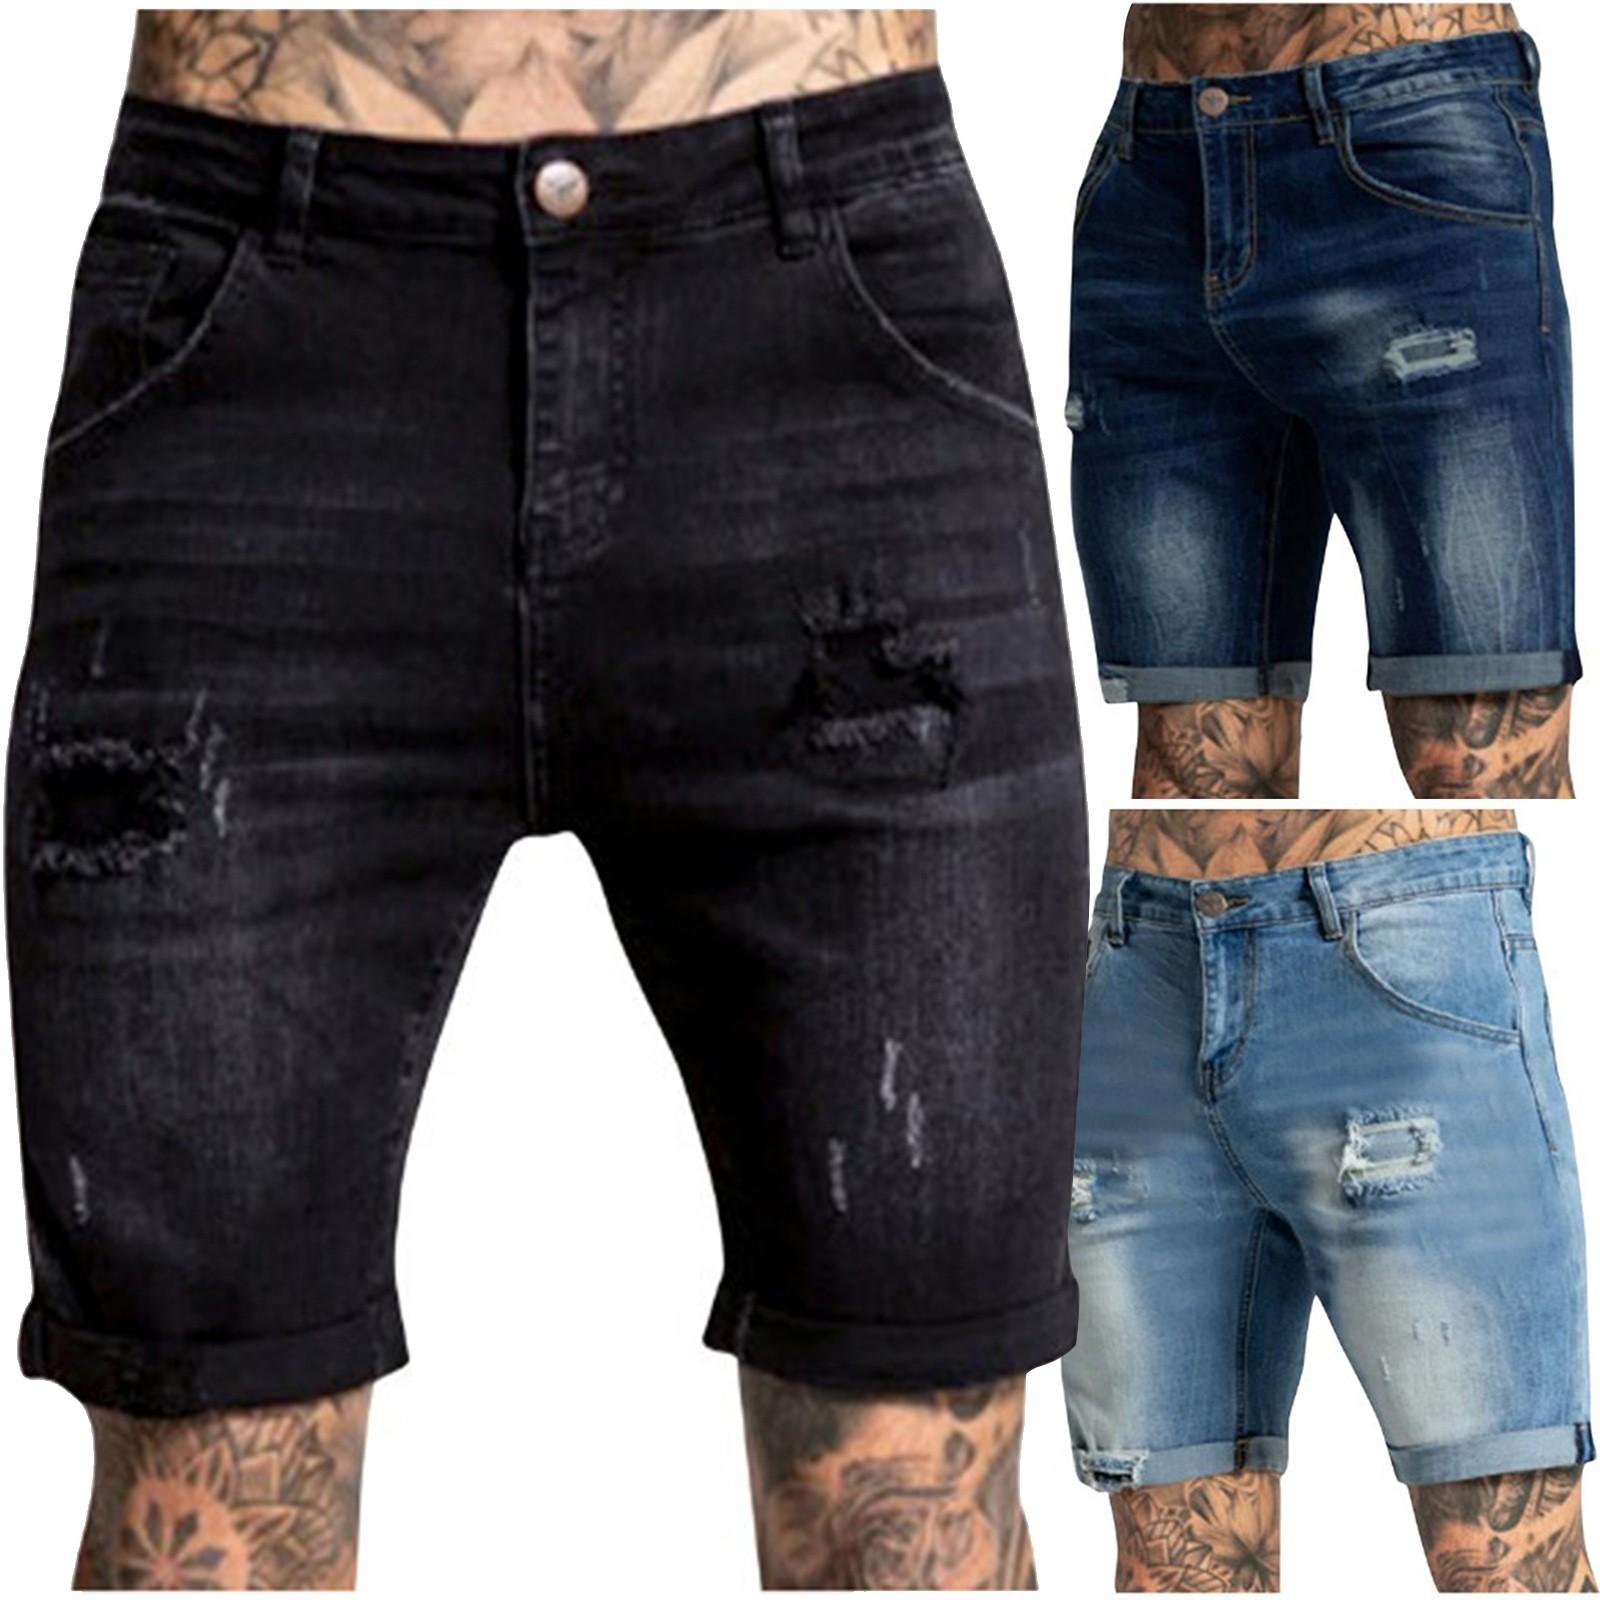 Free birds Men's Jeans Shorts Ripped Distressed Denim Shorts With Broken Hole Distressed Stretchy Jeans Ripped